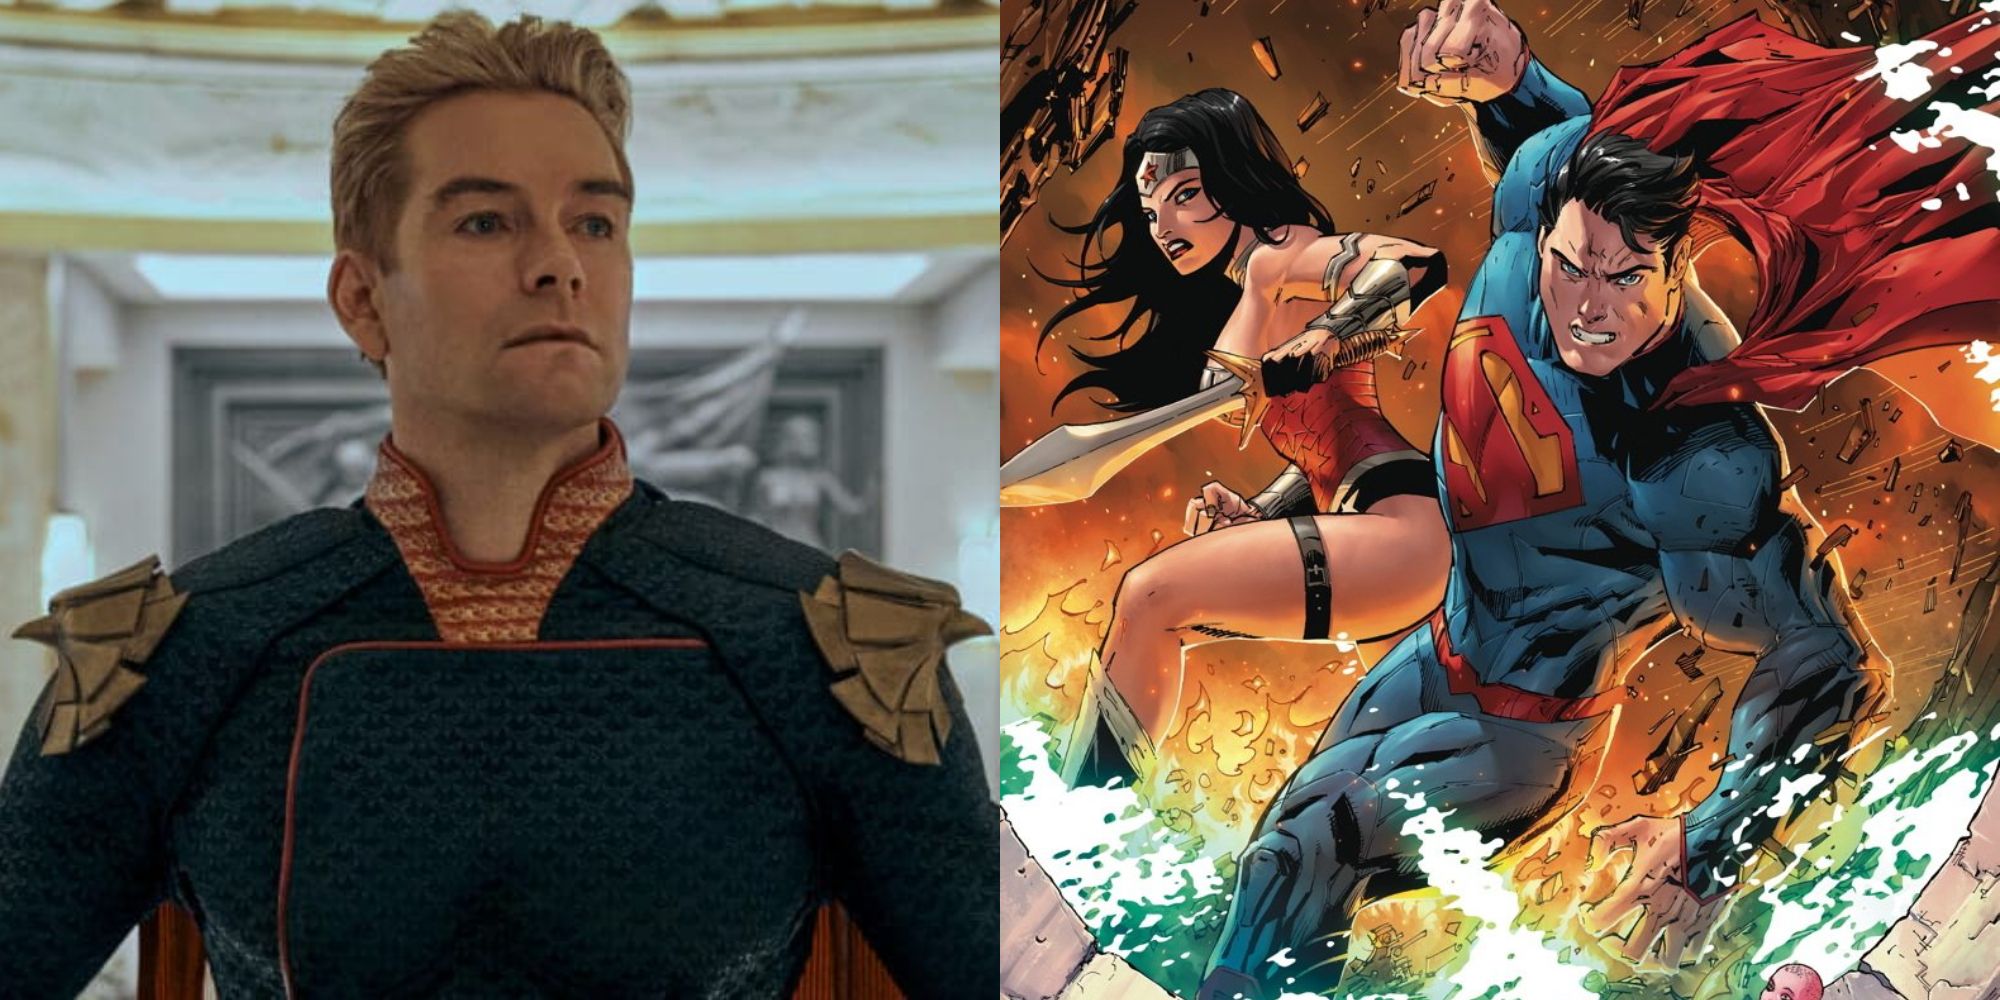 Split image showing Homelander in the Boys and Wonder Woman and Superman in DC Comics.